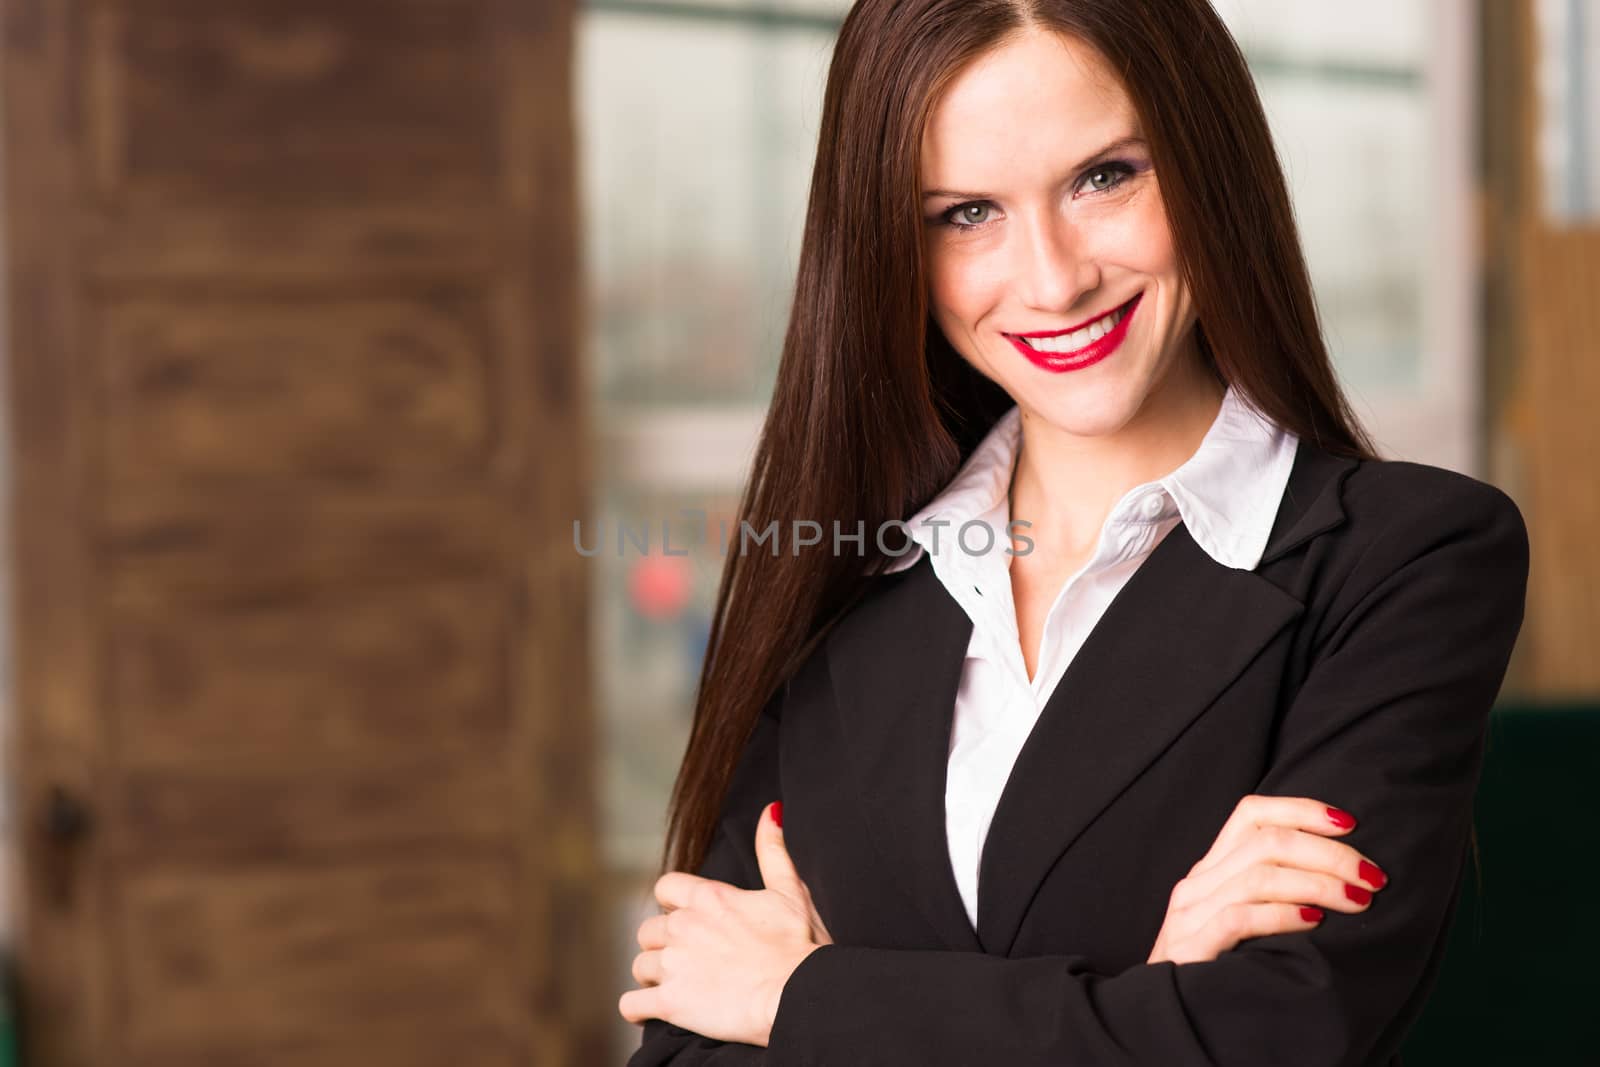 Business Woman Female Arms Crossed Smiling Office Workplace by ChrisBoswell